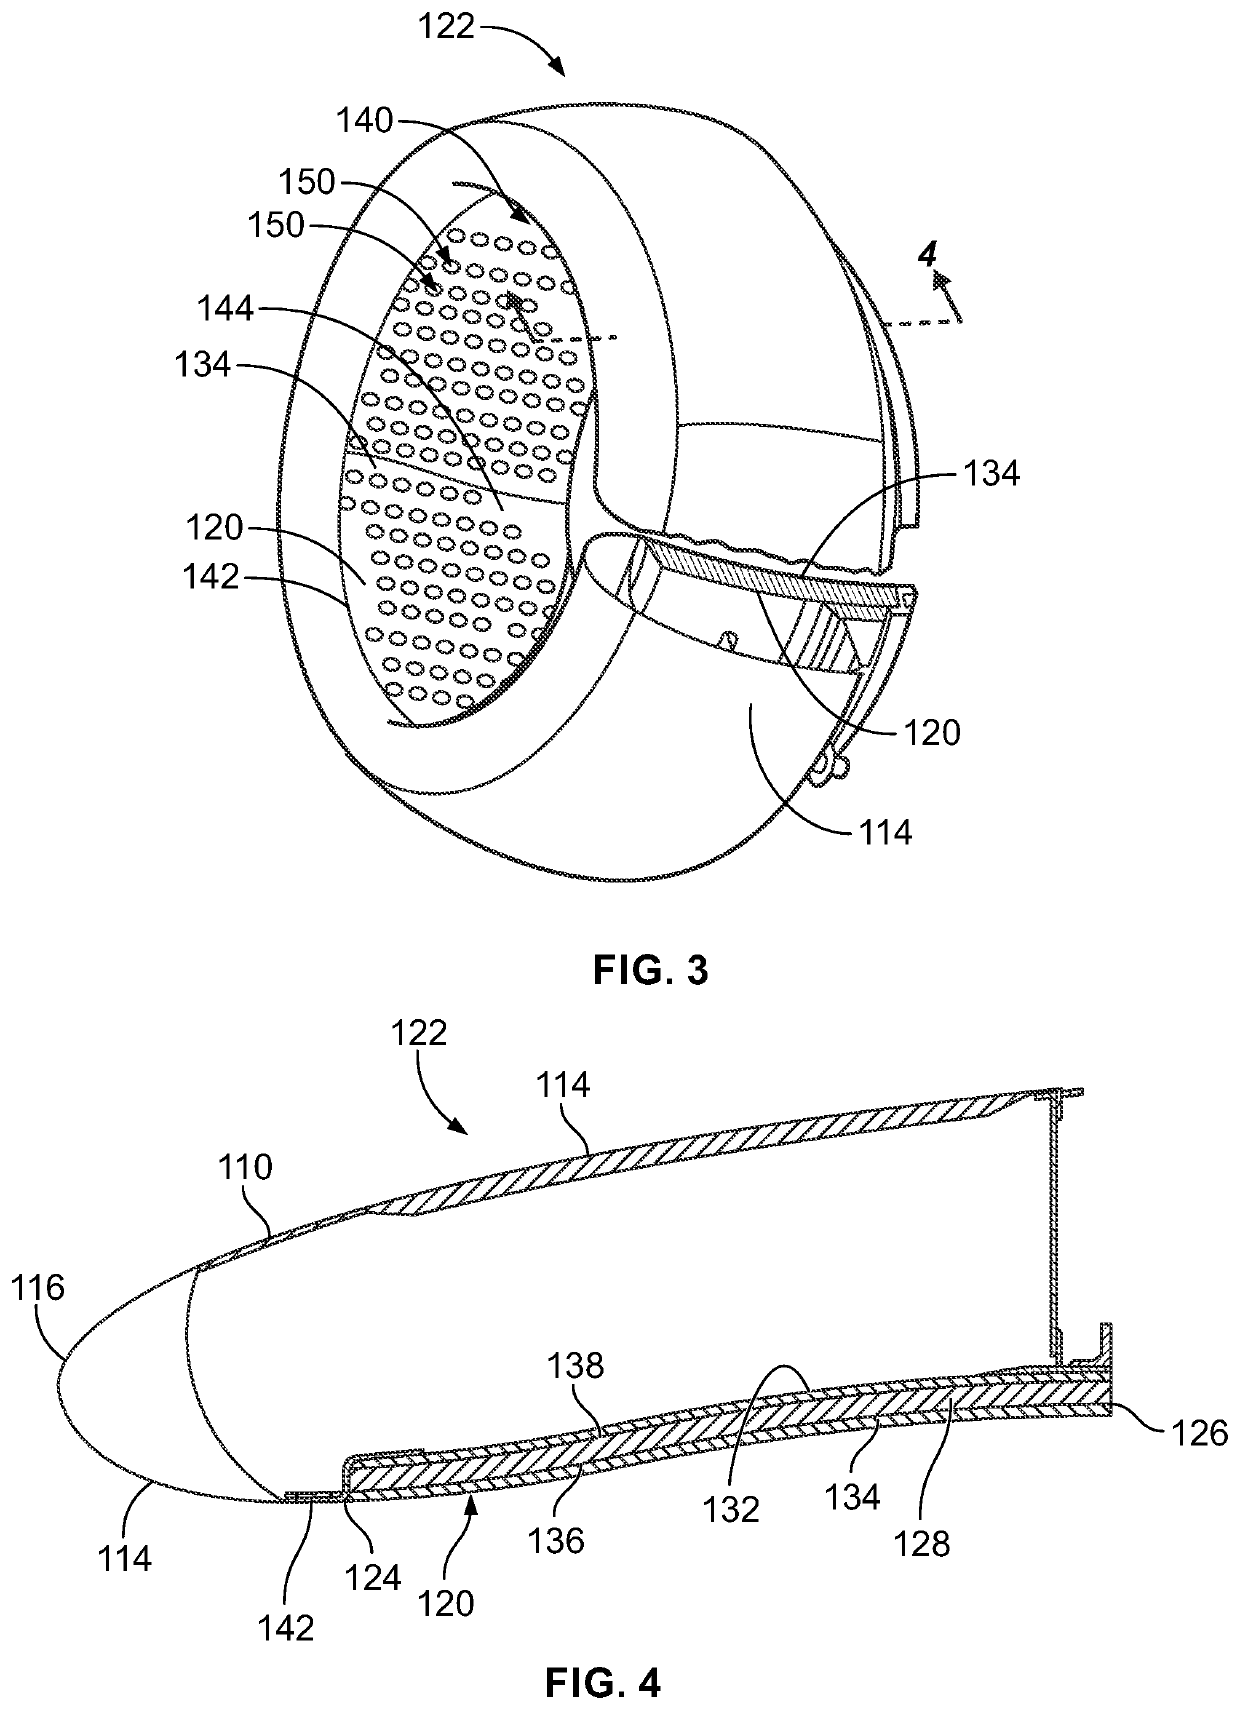 Inner barrel of an engine inlet with laser-machined acoustic perforations